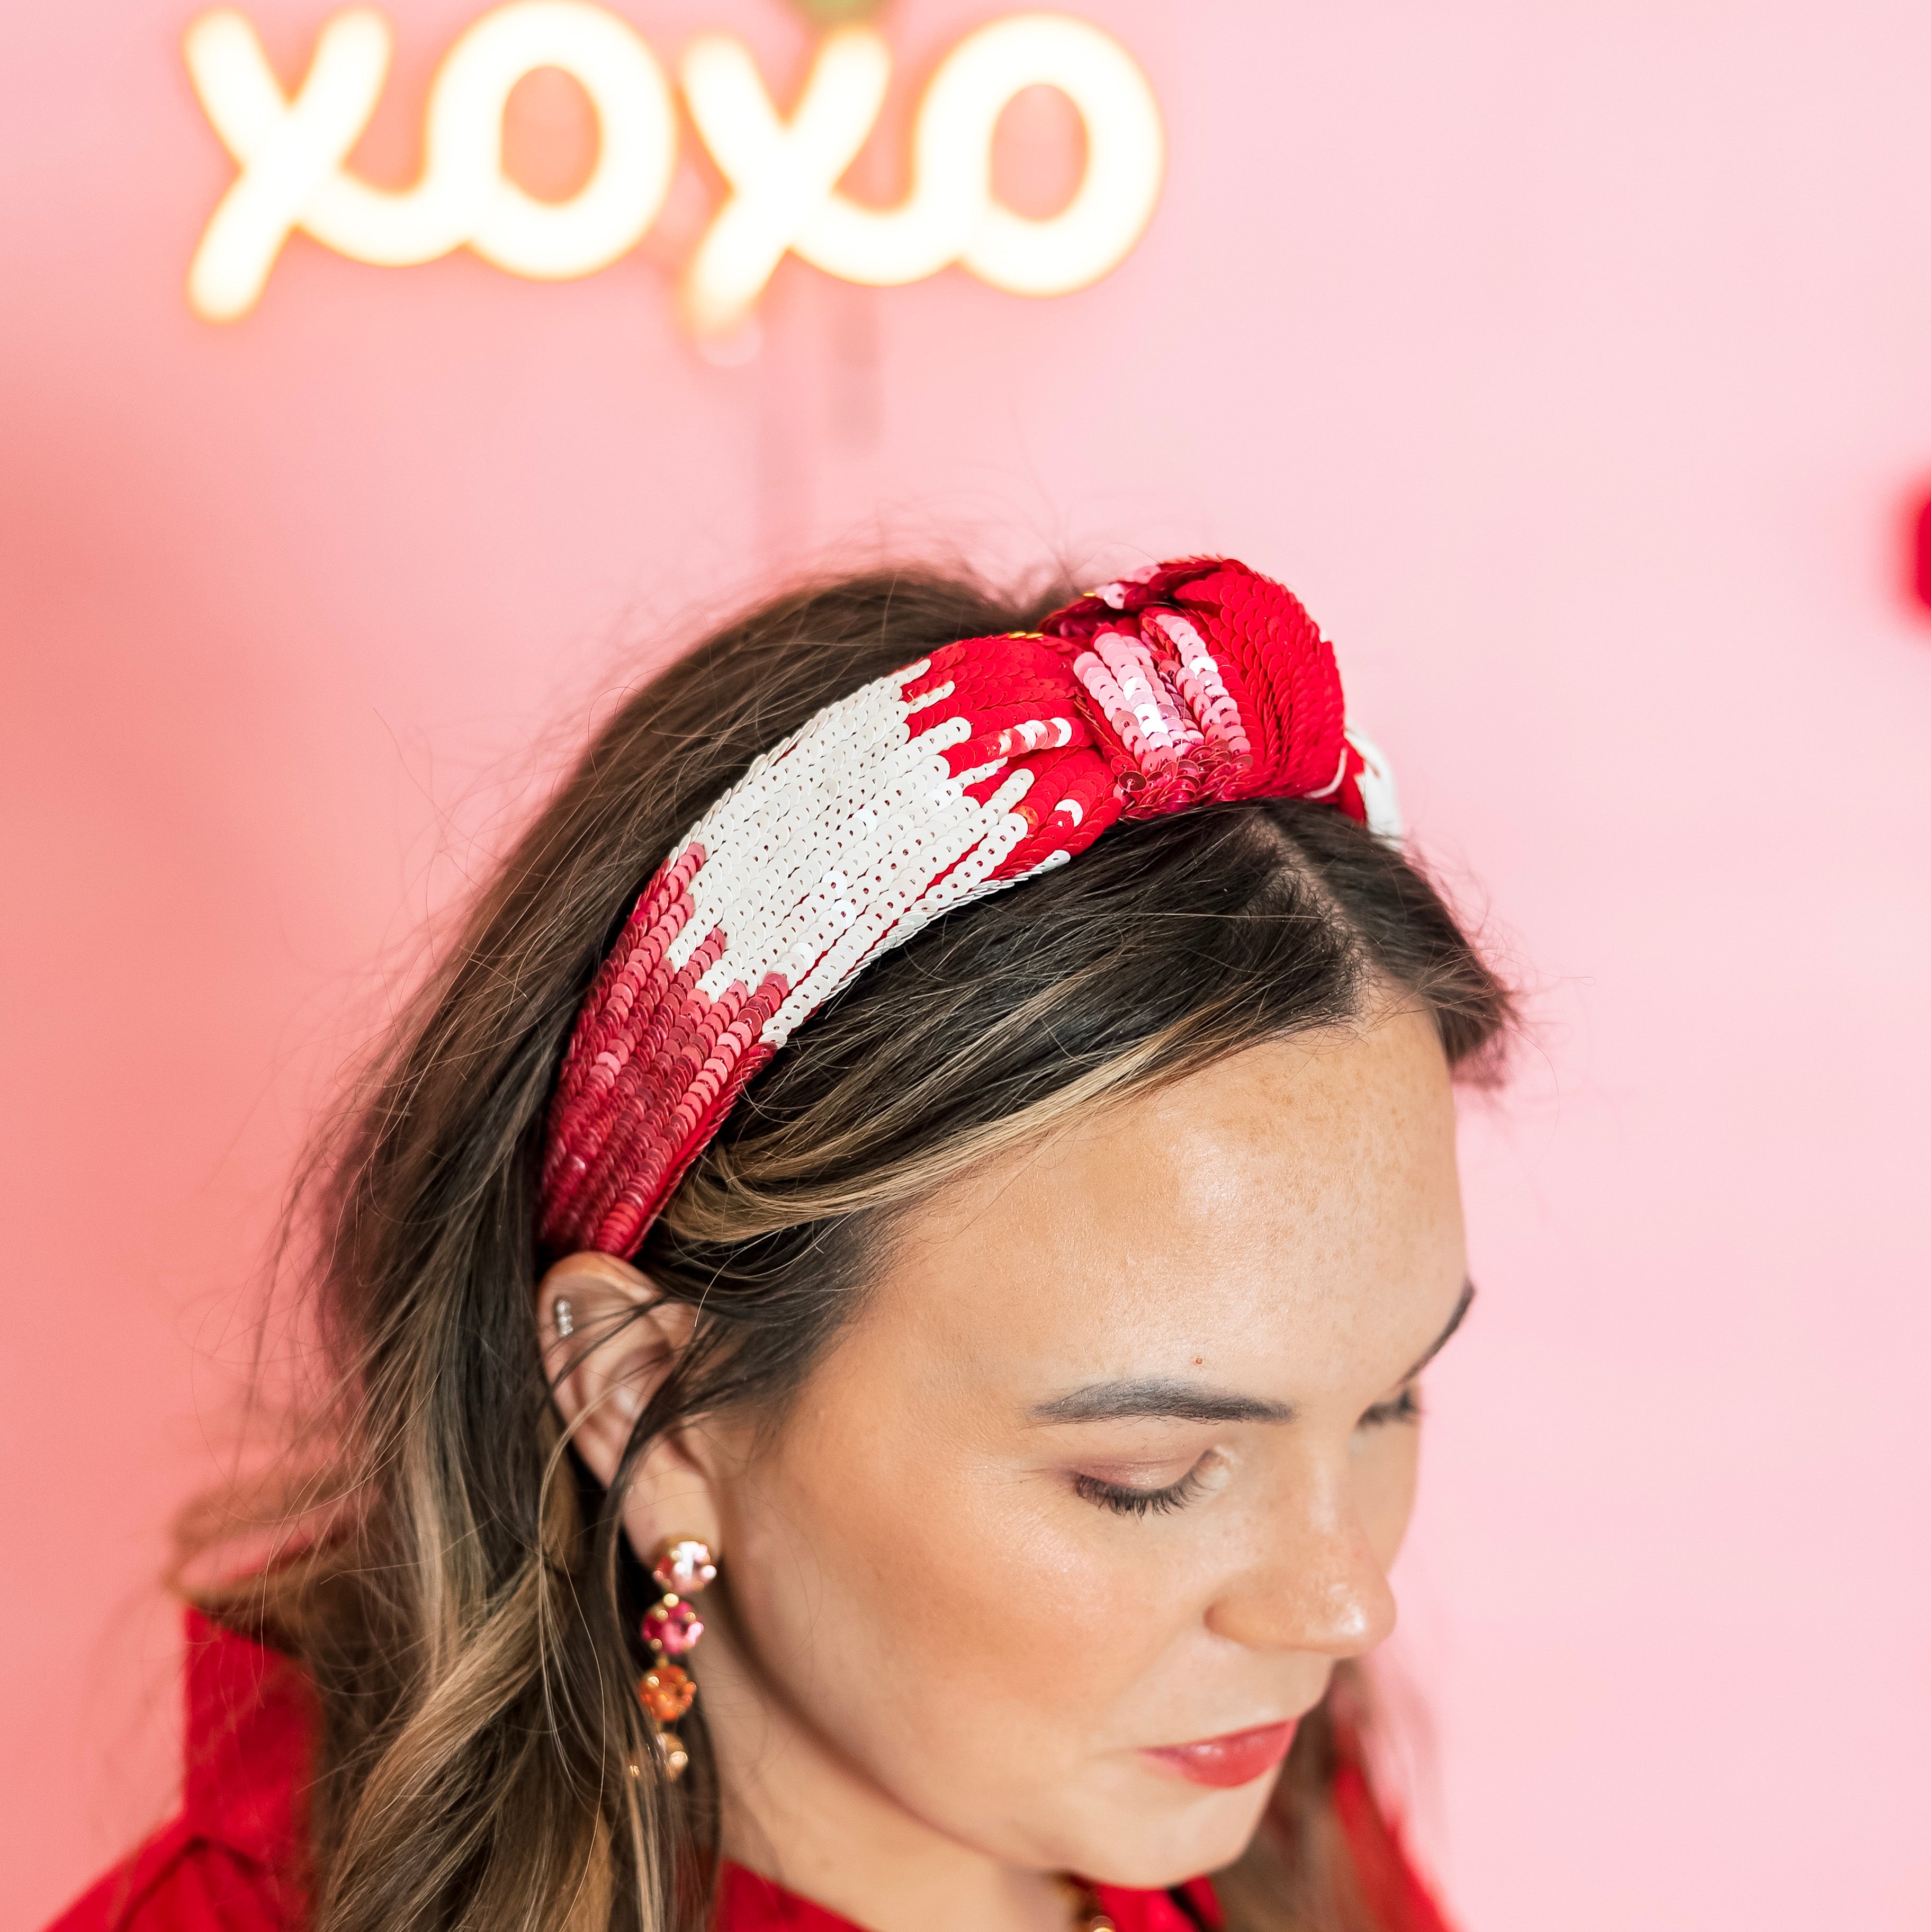 Sequin Large Knot Headband in Red, Pink and White - Giddy Up Glamour Boutique